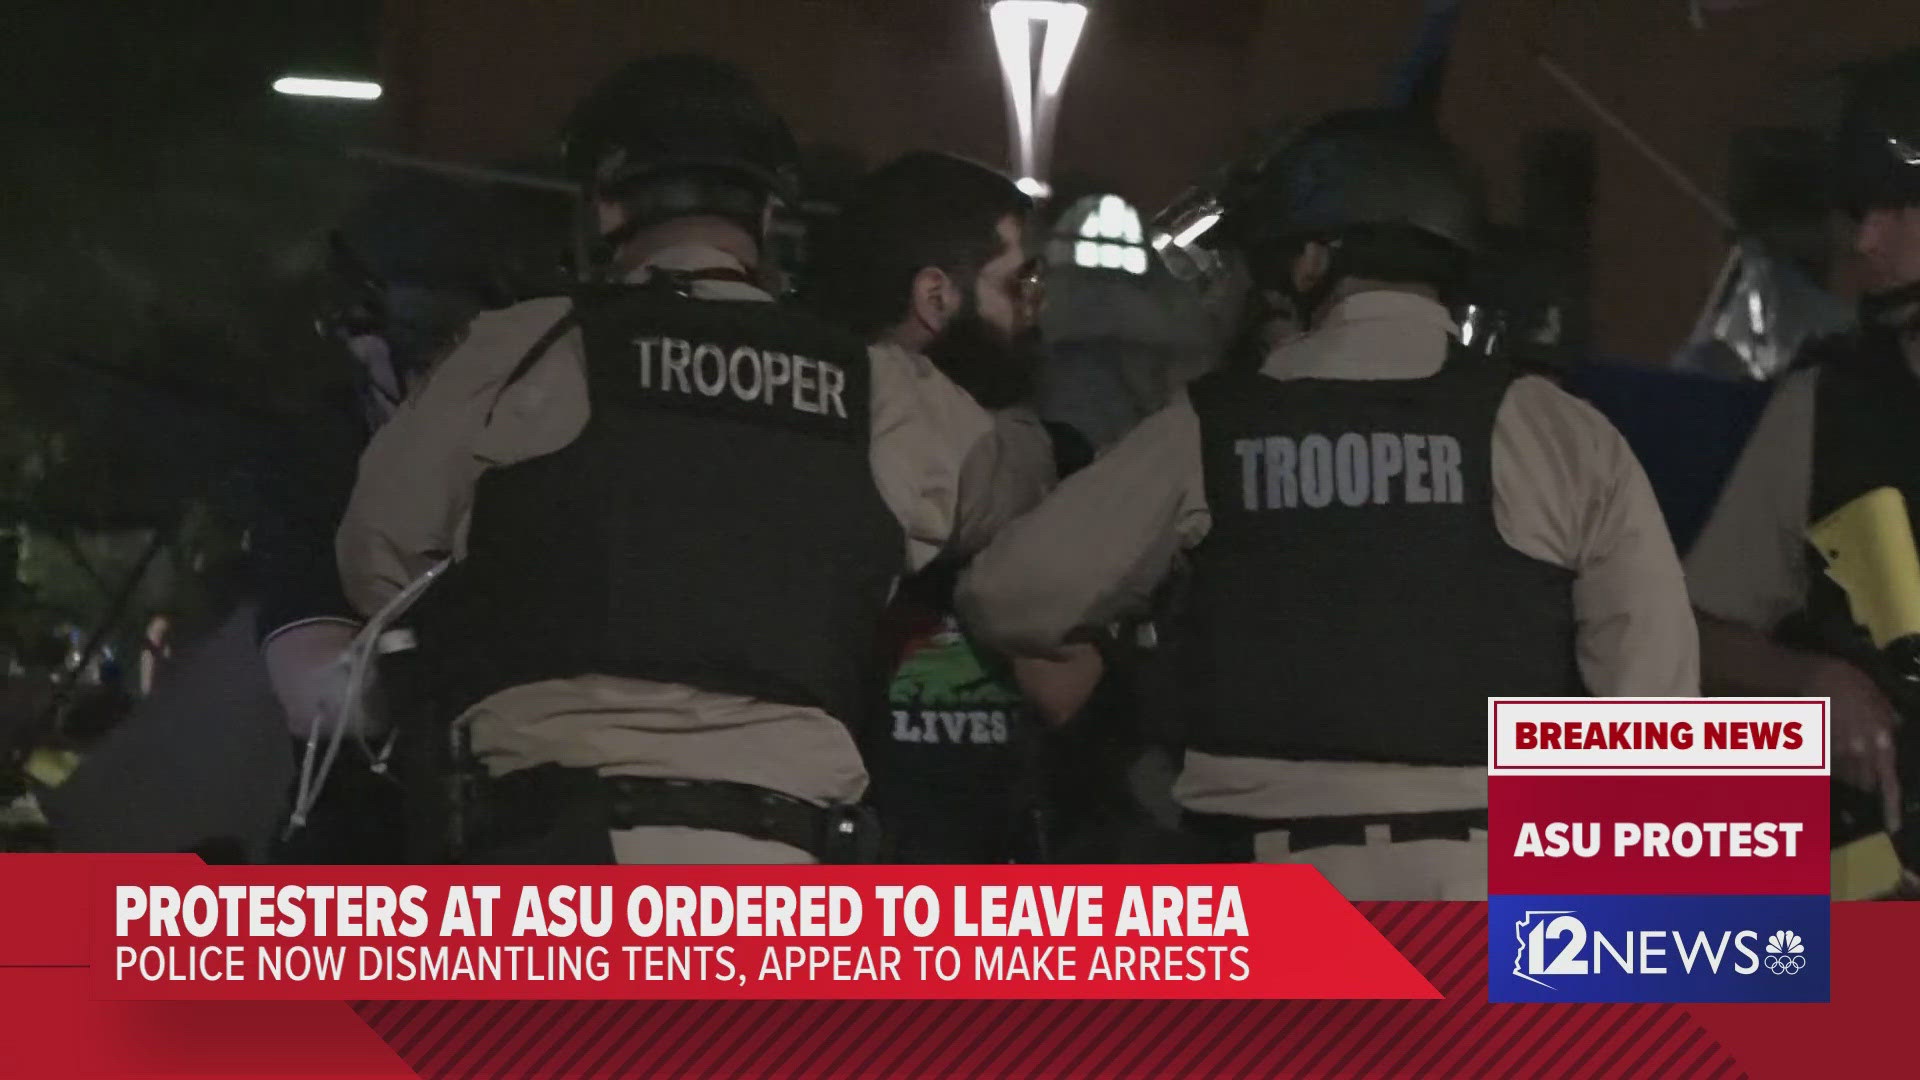 At about midnight on Saturday, police began to break-up a pro-Palestinian protest on ASU's Tempe campus and taking people into custody.